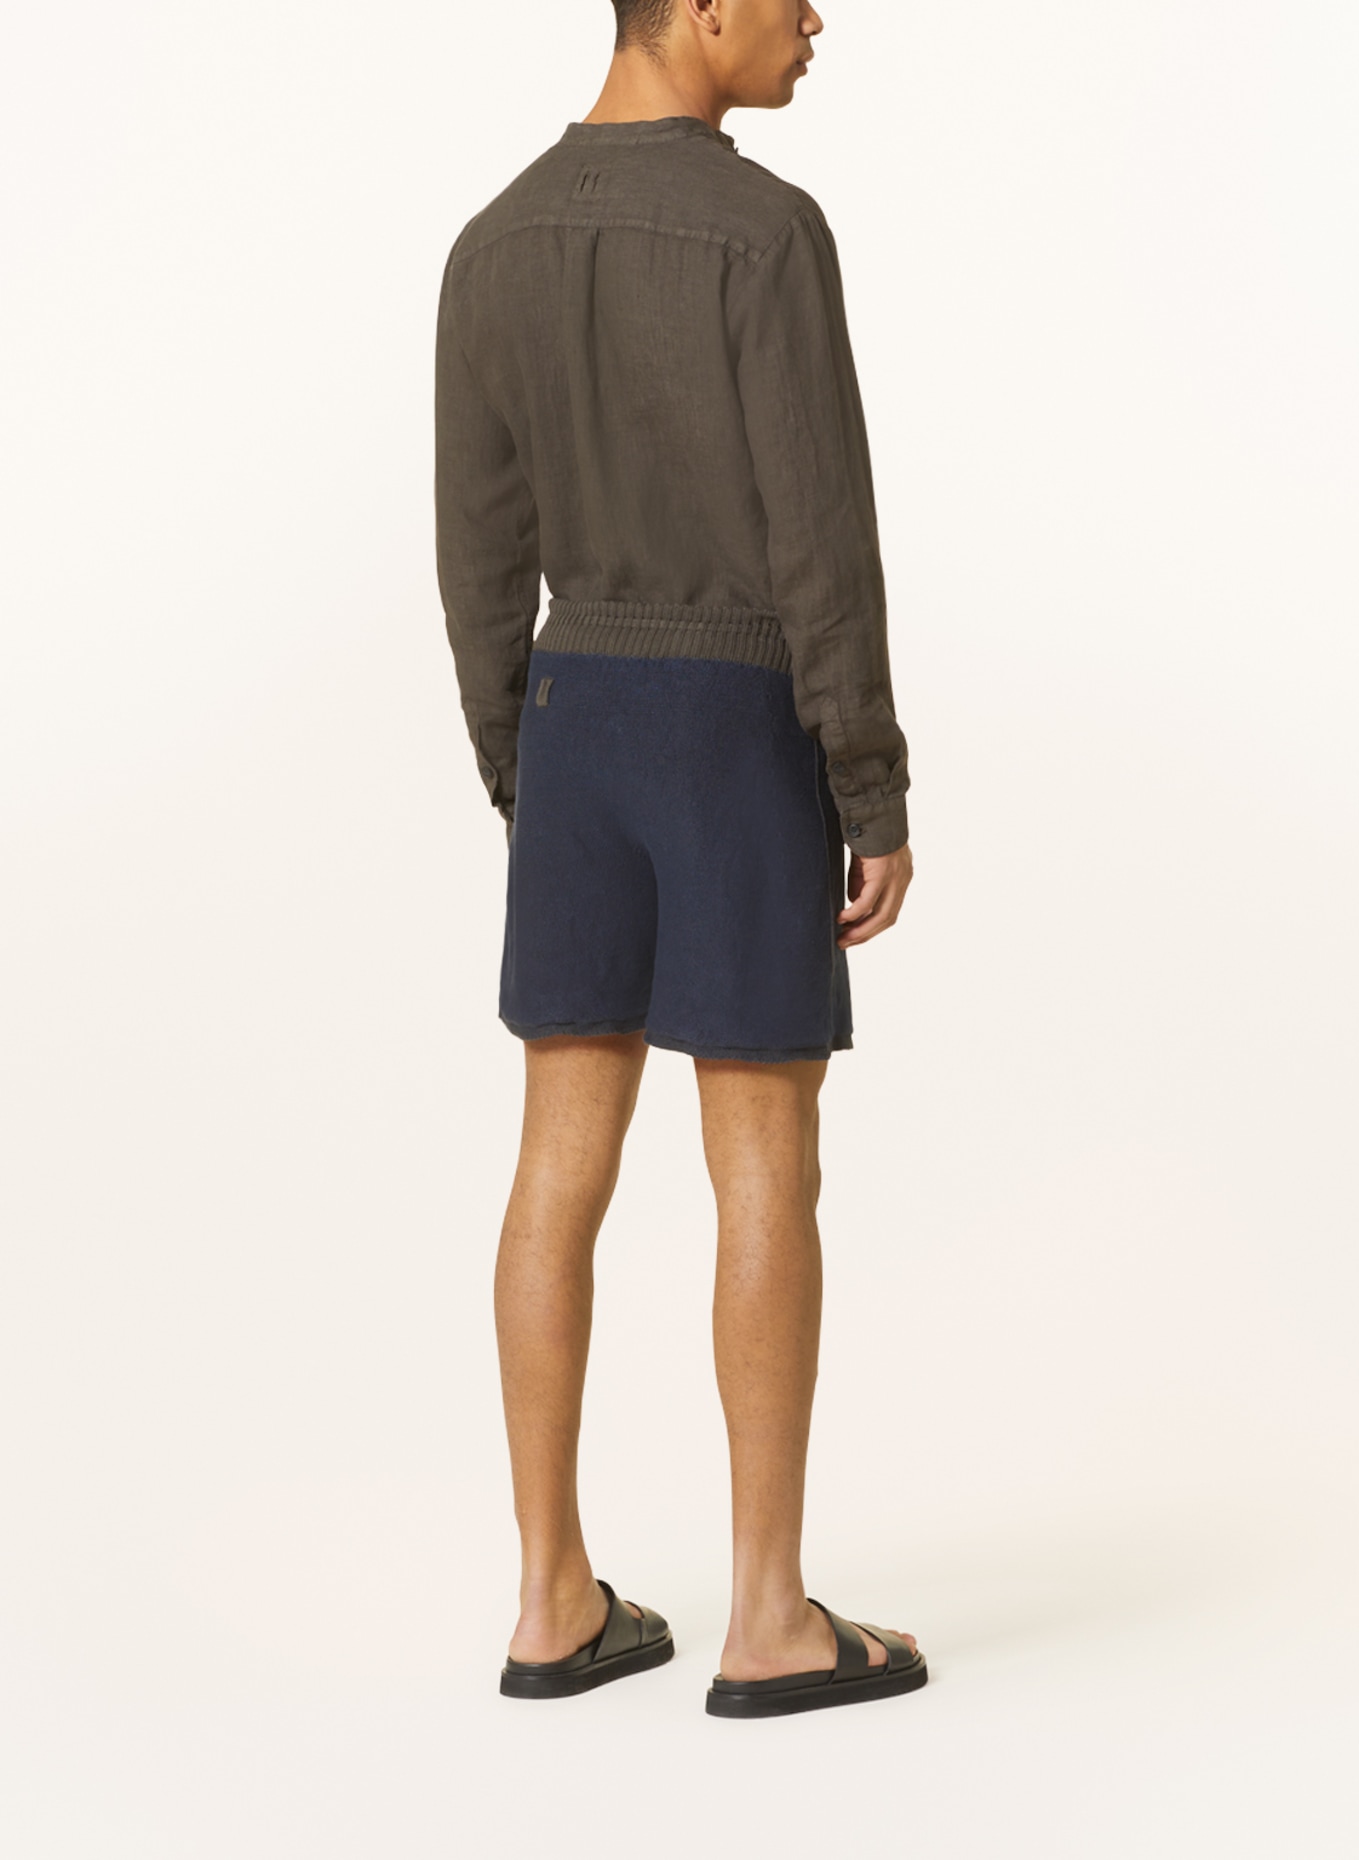 hannes roether Knit shorts HO21CKEY with linen in dark blue/ olive